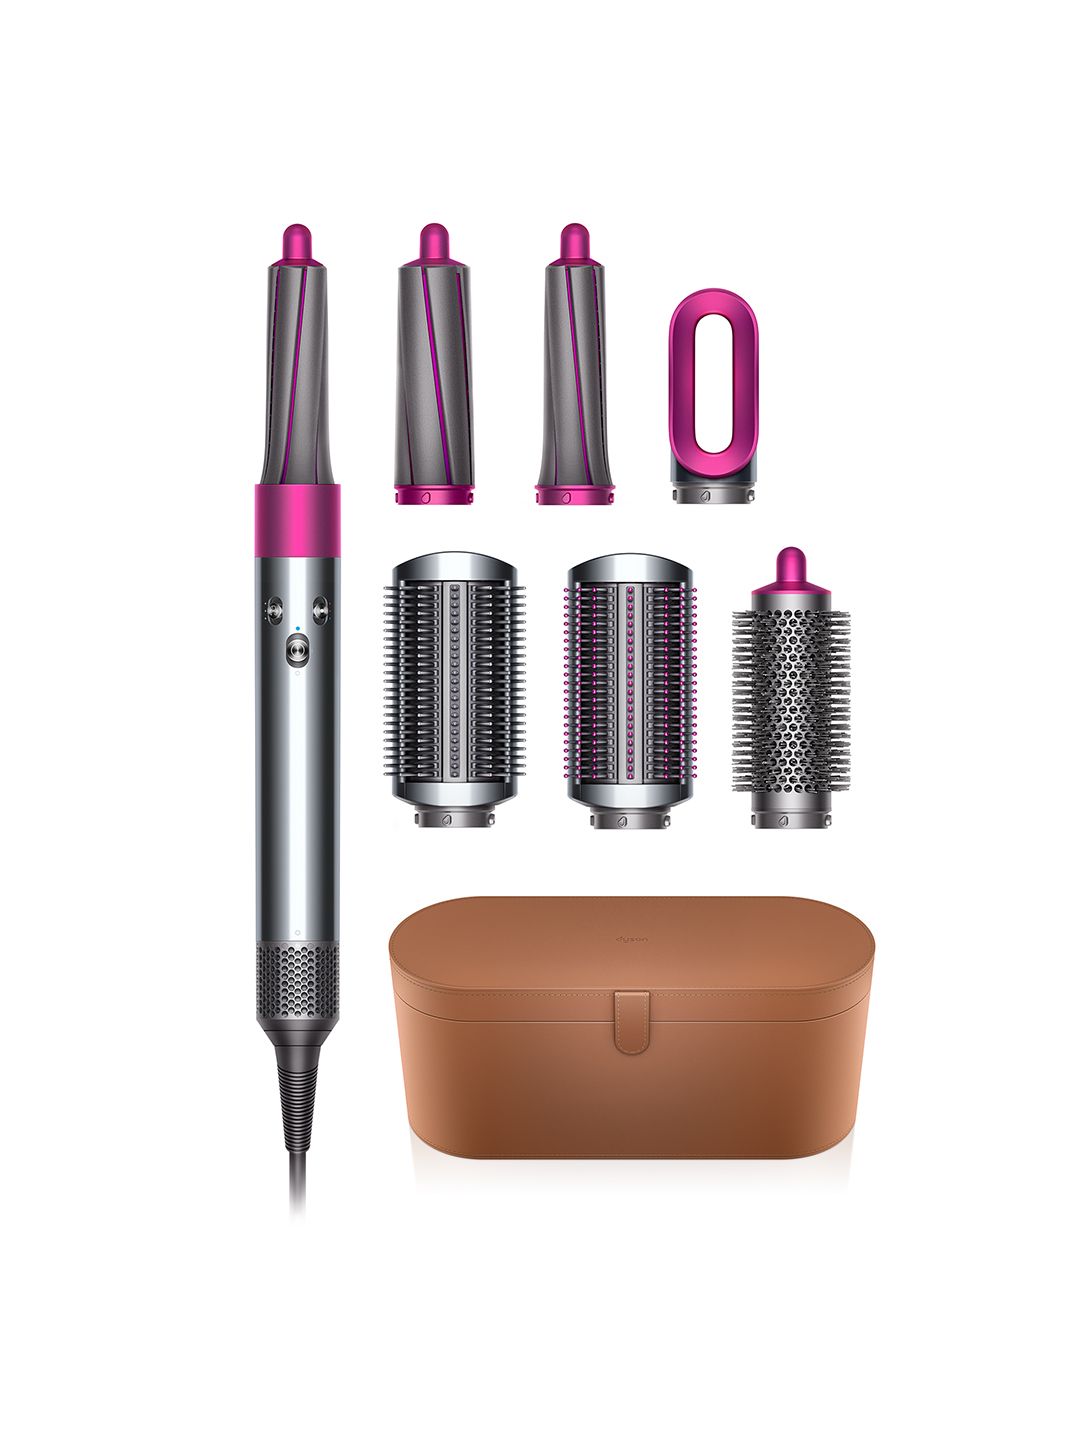 dyson Airwrap Hair Styler Complete - Nickel & Fuchsia Price in India